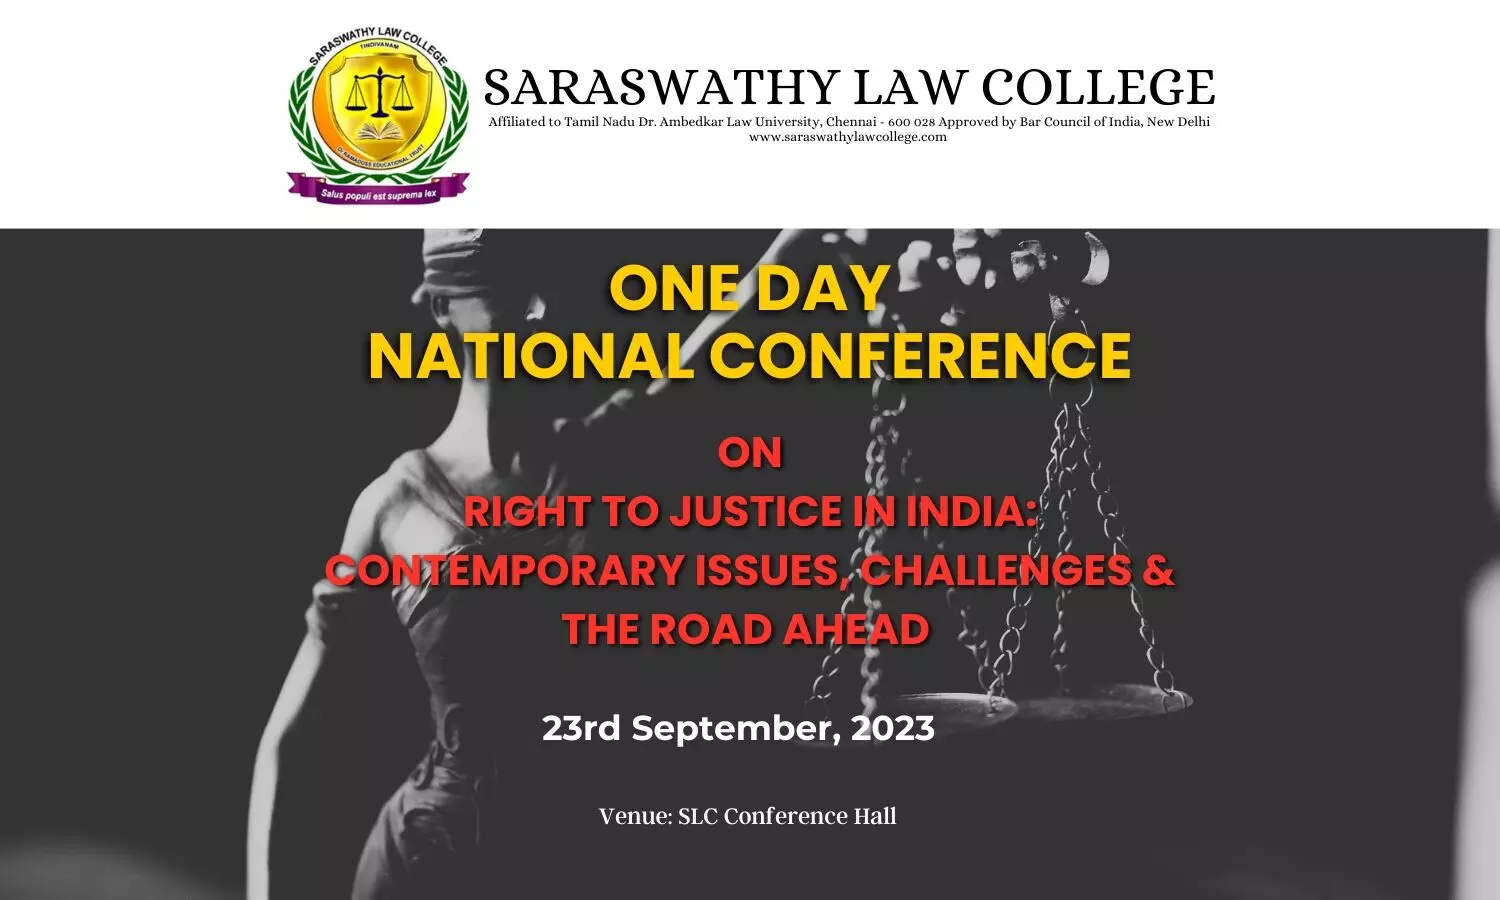 National Conference on Right to Justice in India | Saraswathy Law College